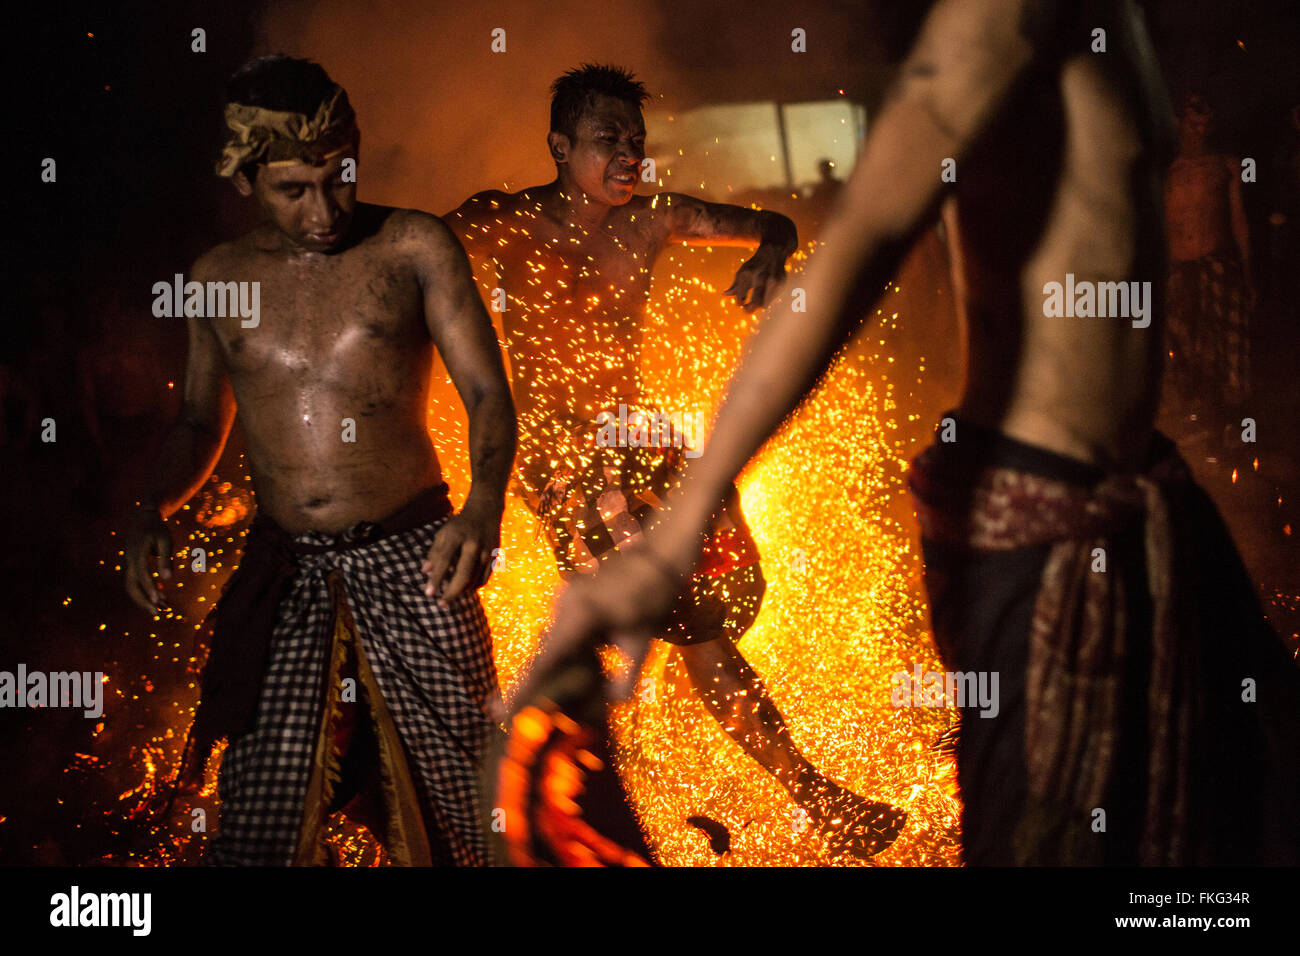 Bali, Indonesia. 08th Mar, 2016. A Balinese man kicks the fire during the 'Mesabatan Api' ritual a head of Nyepi Day on March, 2016 at Banjar Nagi in Gianyar, Bali, Indonesia. Mesabatan Api is held annually a day before the Nyepi Day of Silence, as symbolizes the purification of universe and human body trough fire. Nyepi is a Hindu celebration observed every new year according to the Balinese calendar. Credit:  Agung Parameswara/Alamy Live News Stock Photo